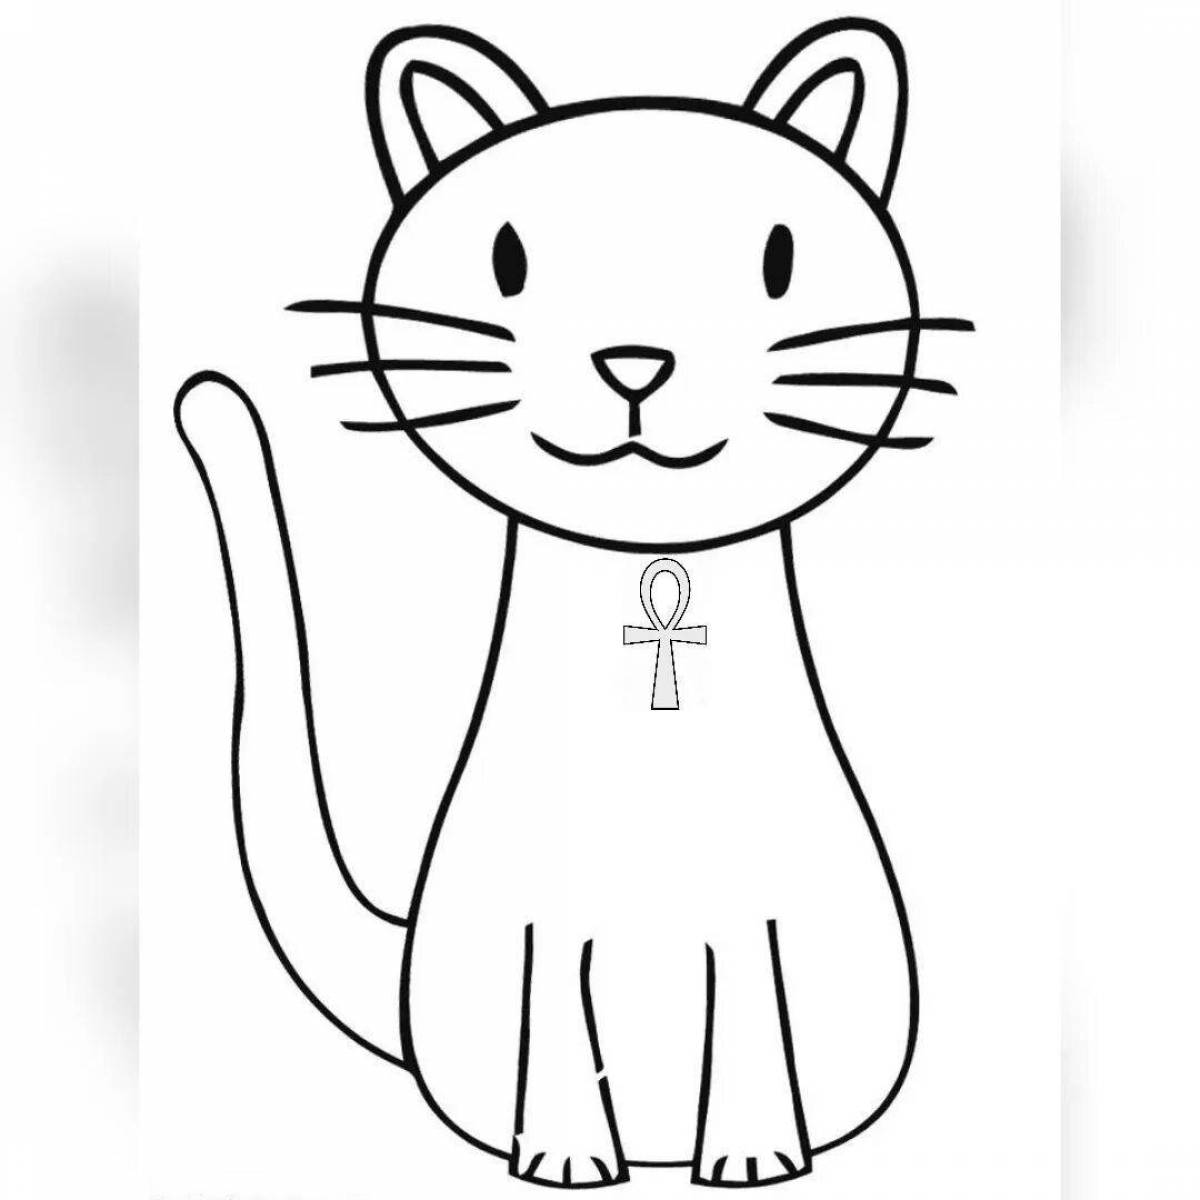 Crazy cat coloring book for 2-3 year olds